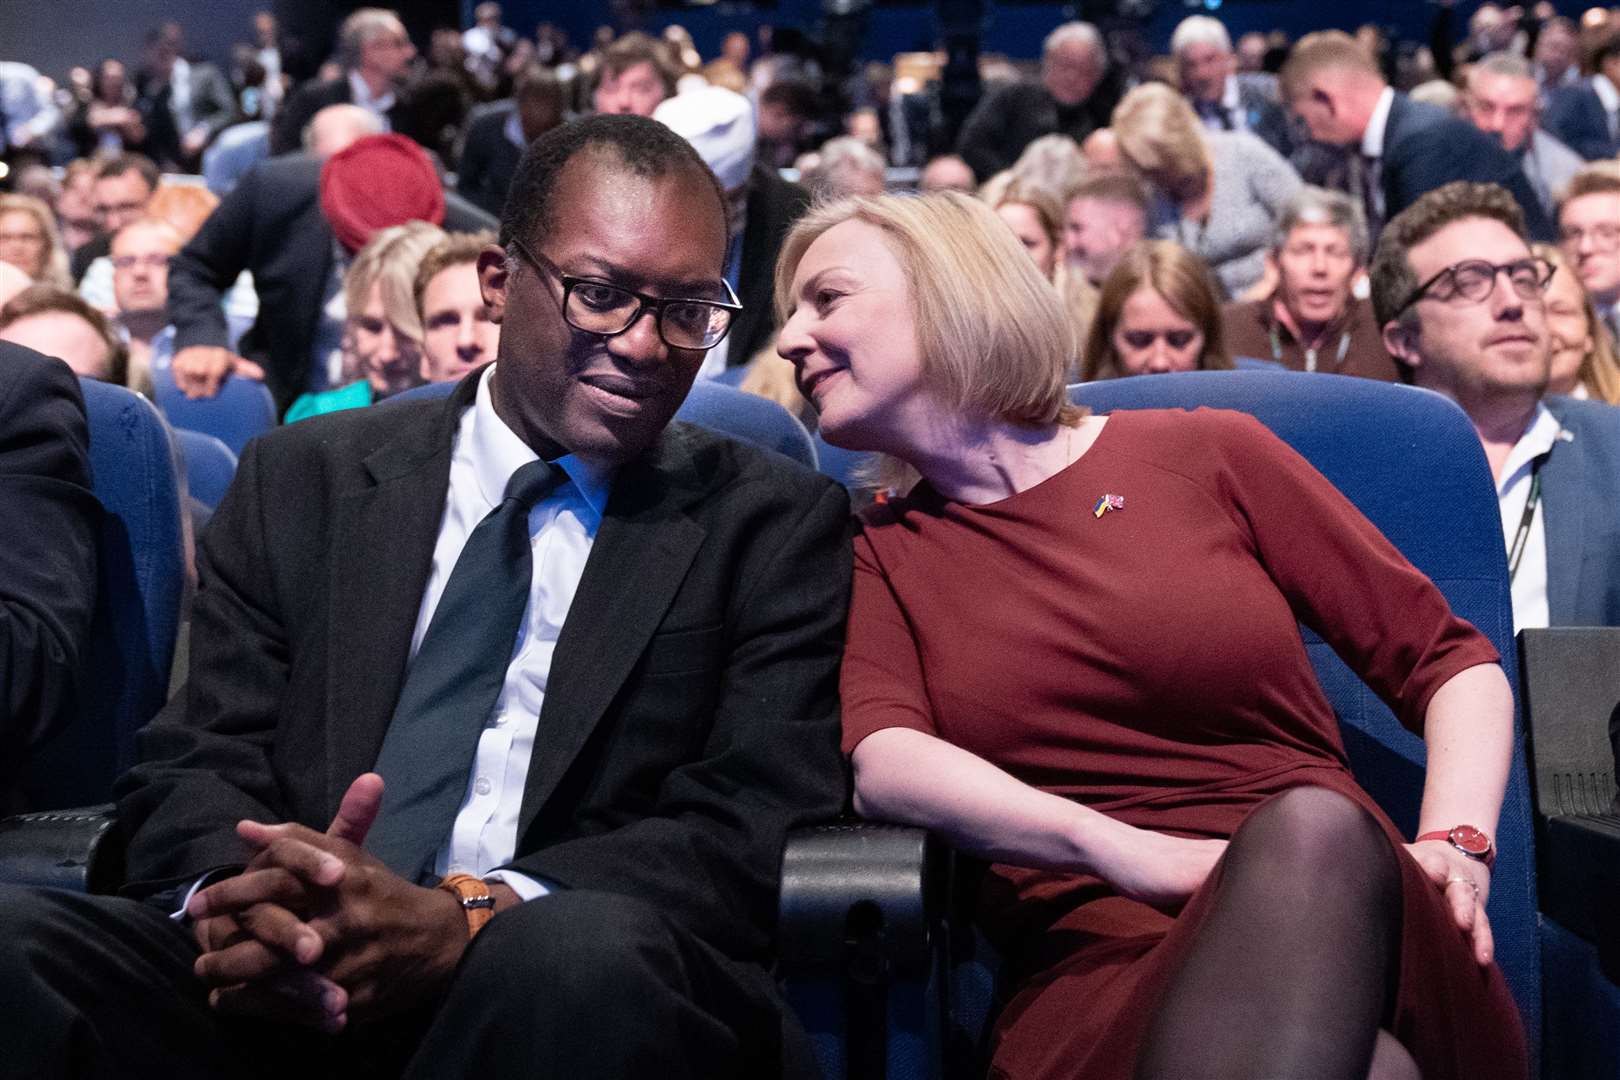 Kwasi Kwarteng was sacked by former PM Liz Truss after his mini-budget tanked the pound (Stefan Rousseau/PA)